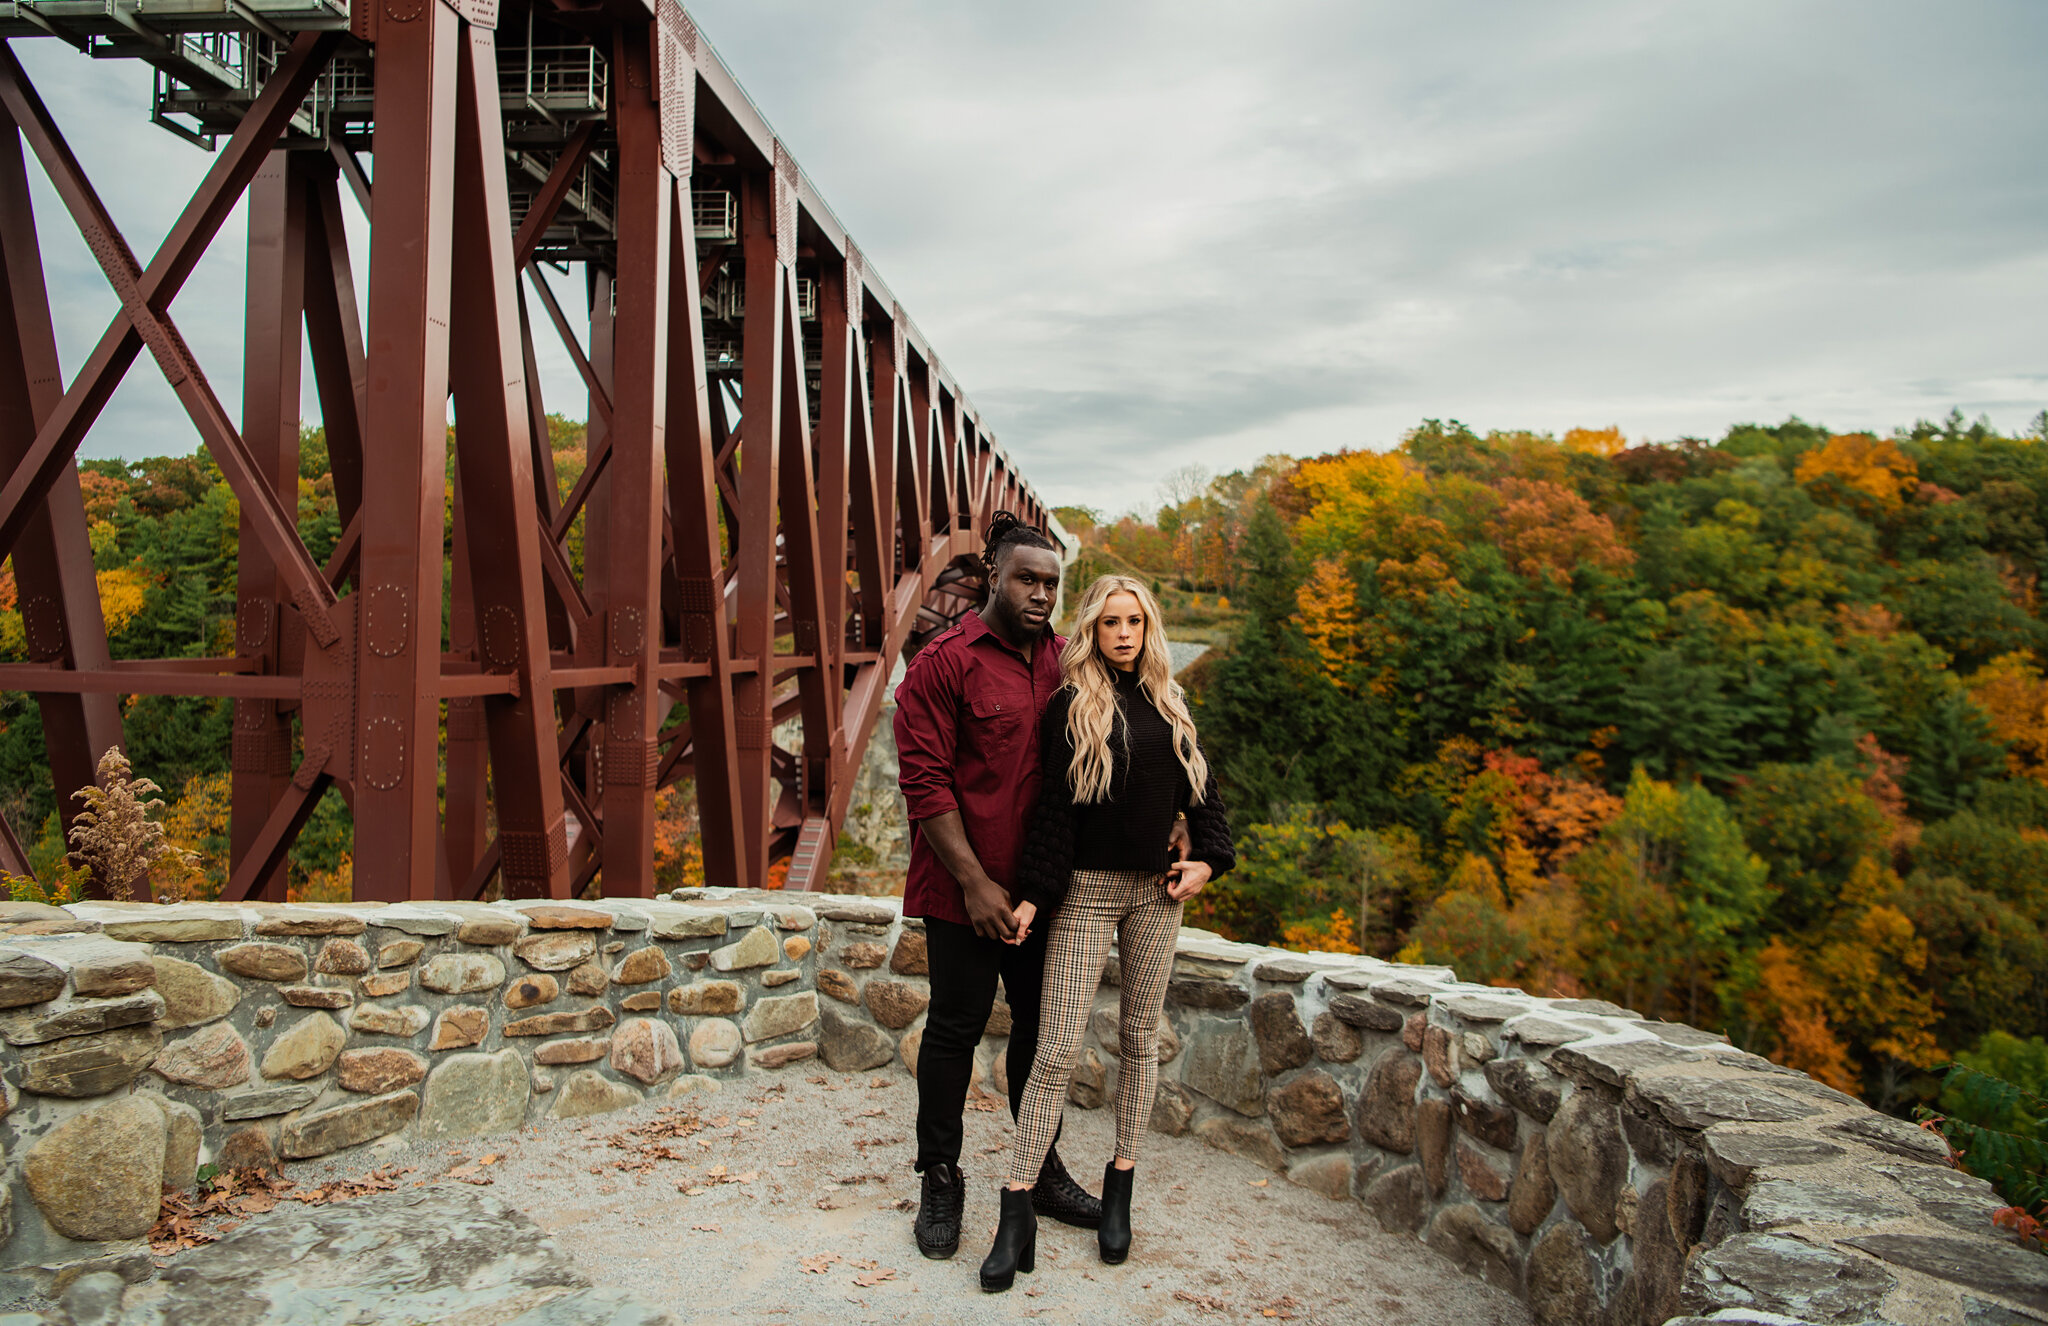 Letchworth_State_Park_Rochester_Couples_Session_JILL_STUDIO_Rochester_NY_Photographer_9398.jpg